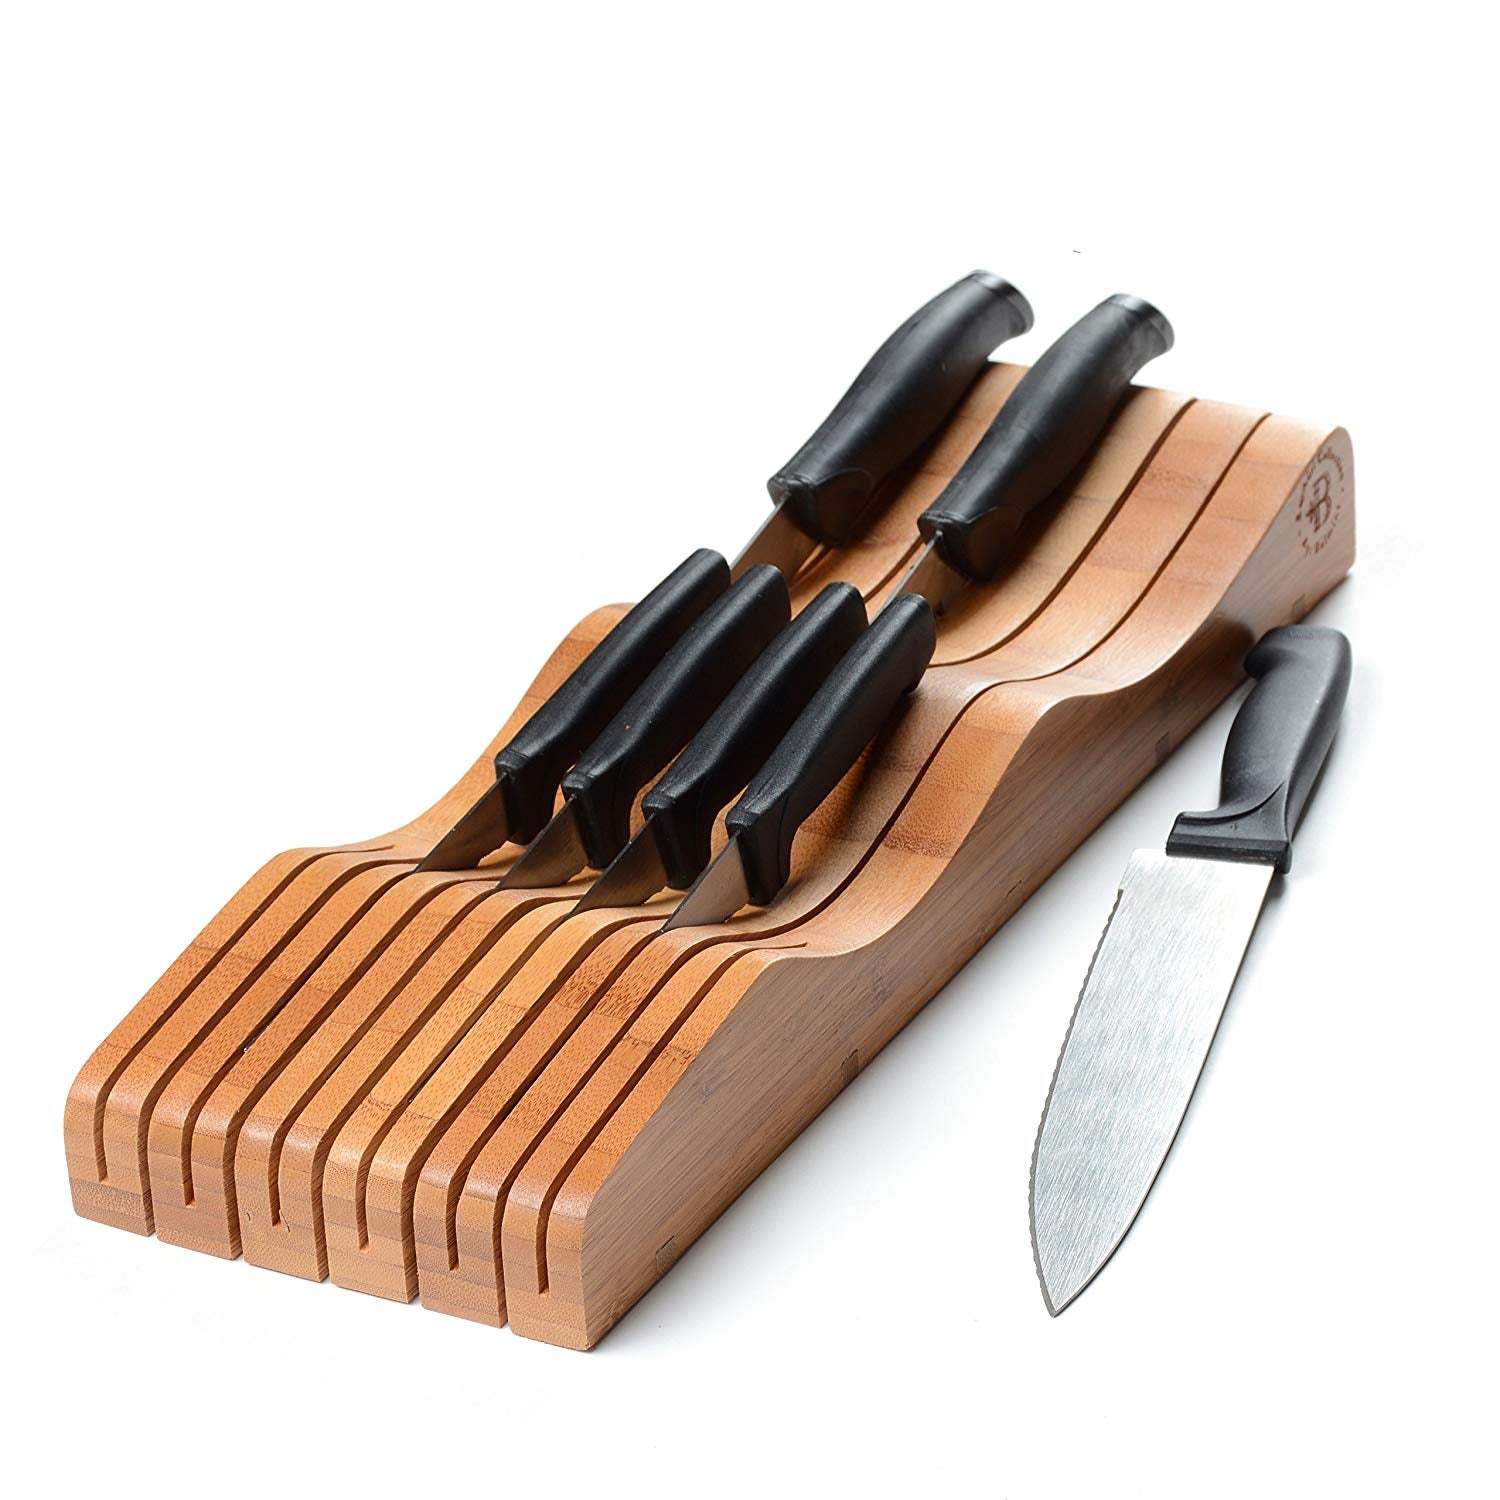 Bamboo In-Drawer Knife Organizer - Kitchen Knife Block without Knives, Wooden Steak Knives Holder Cutlery Block | 100% Natural Bamboo Craftsmanship